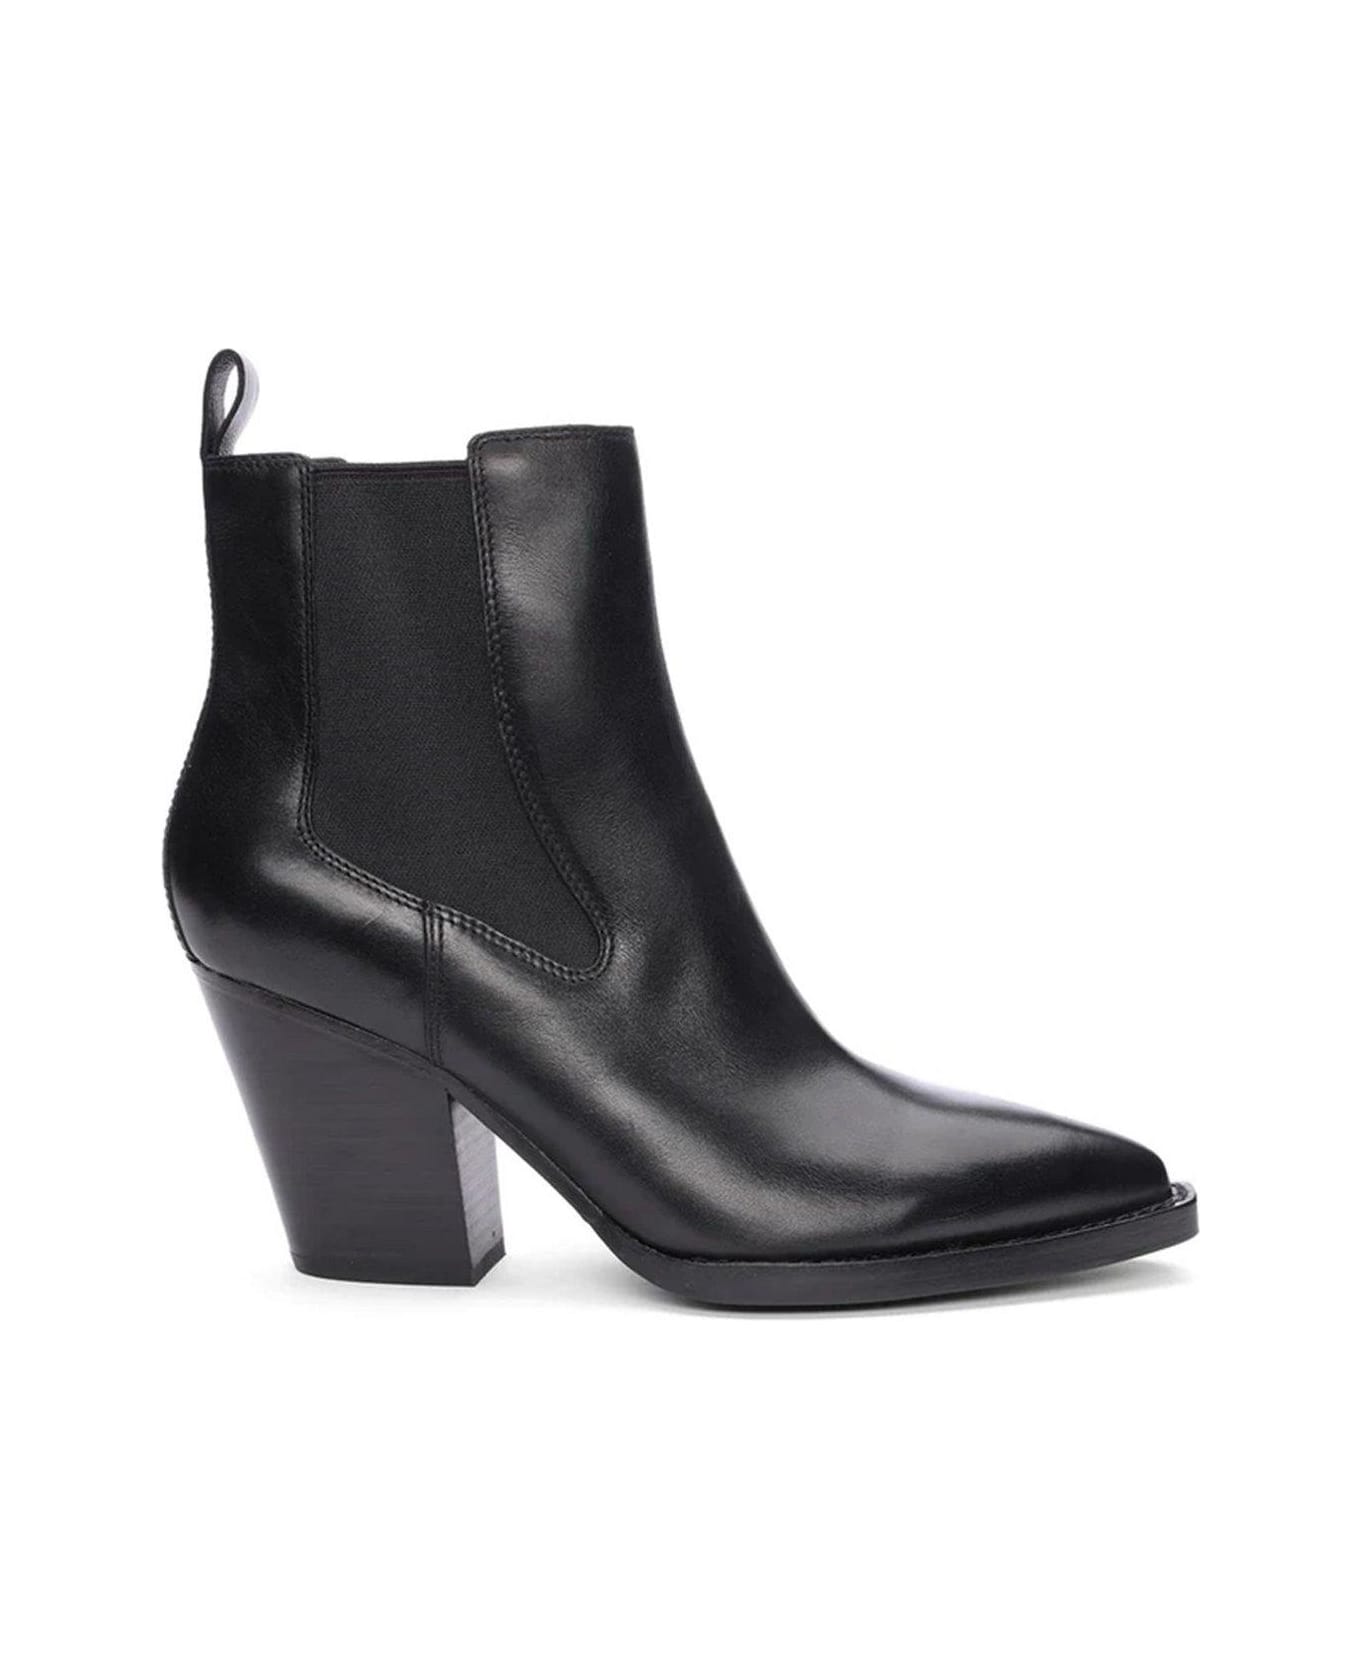 Ash Pointed-toe Ankle Boots Boots - NERO